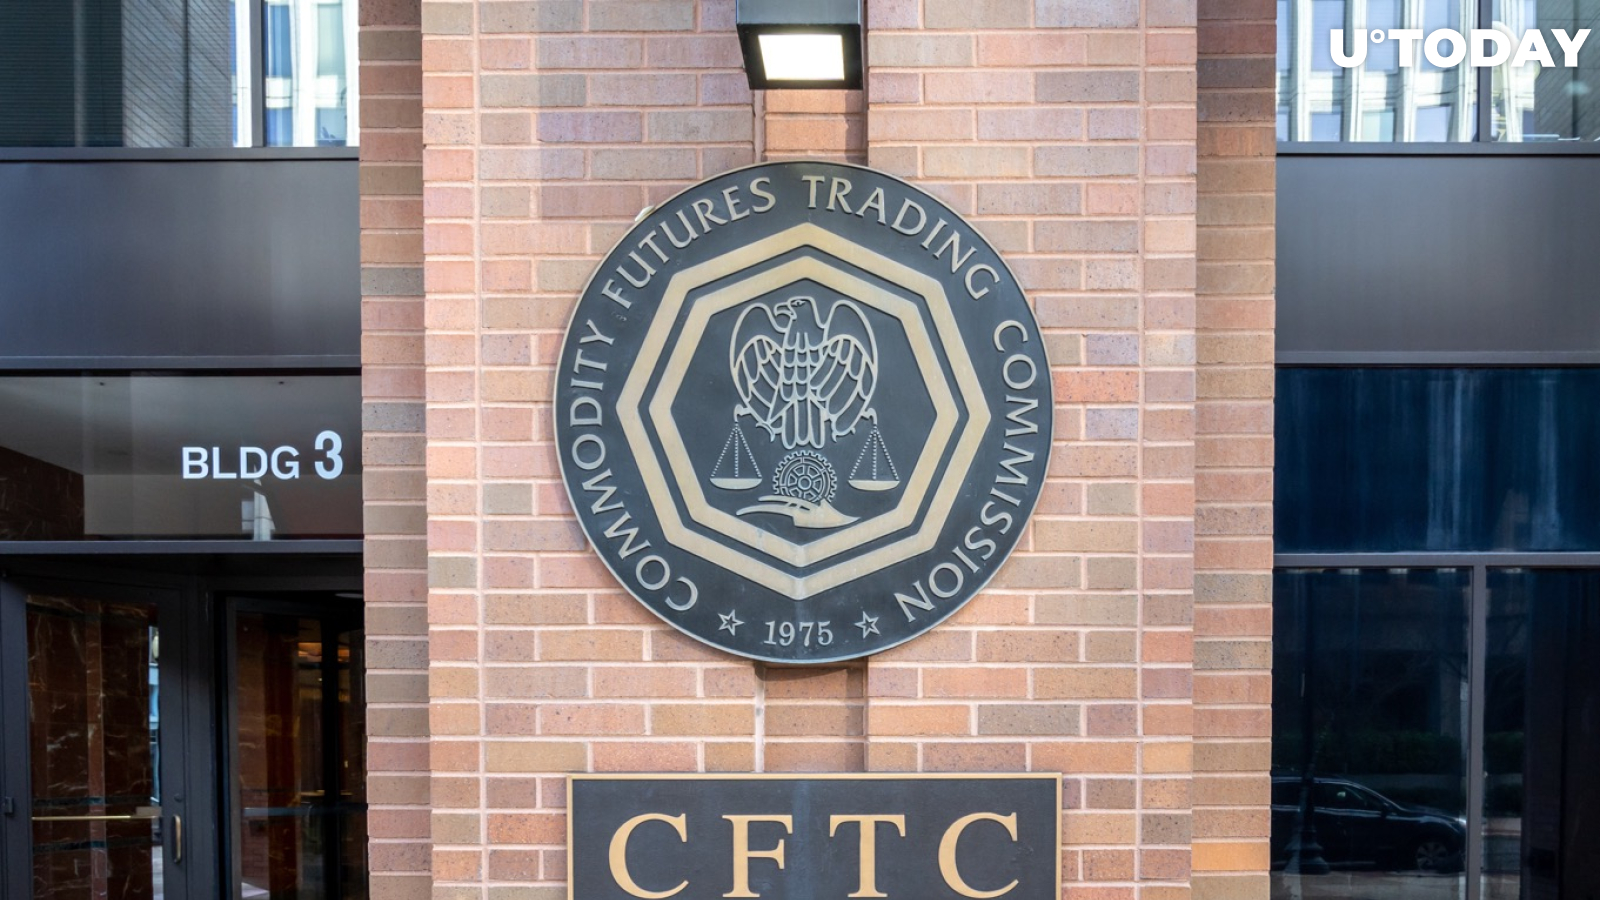 CFTC says cryptocurrency ether is a commodity, and it's open to ether derivatives